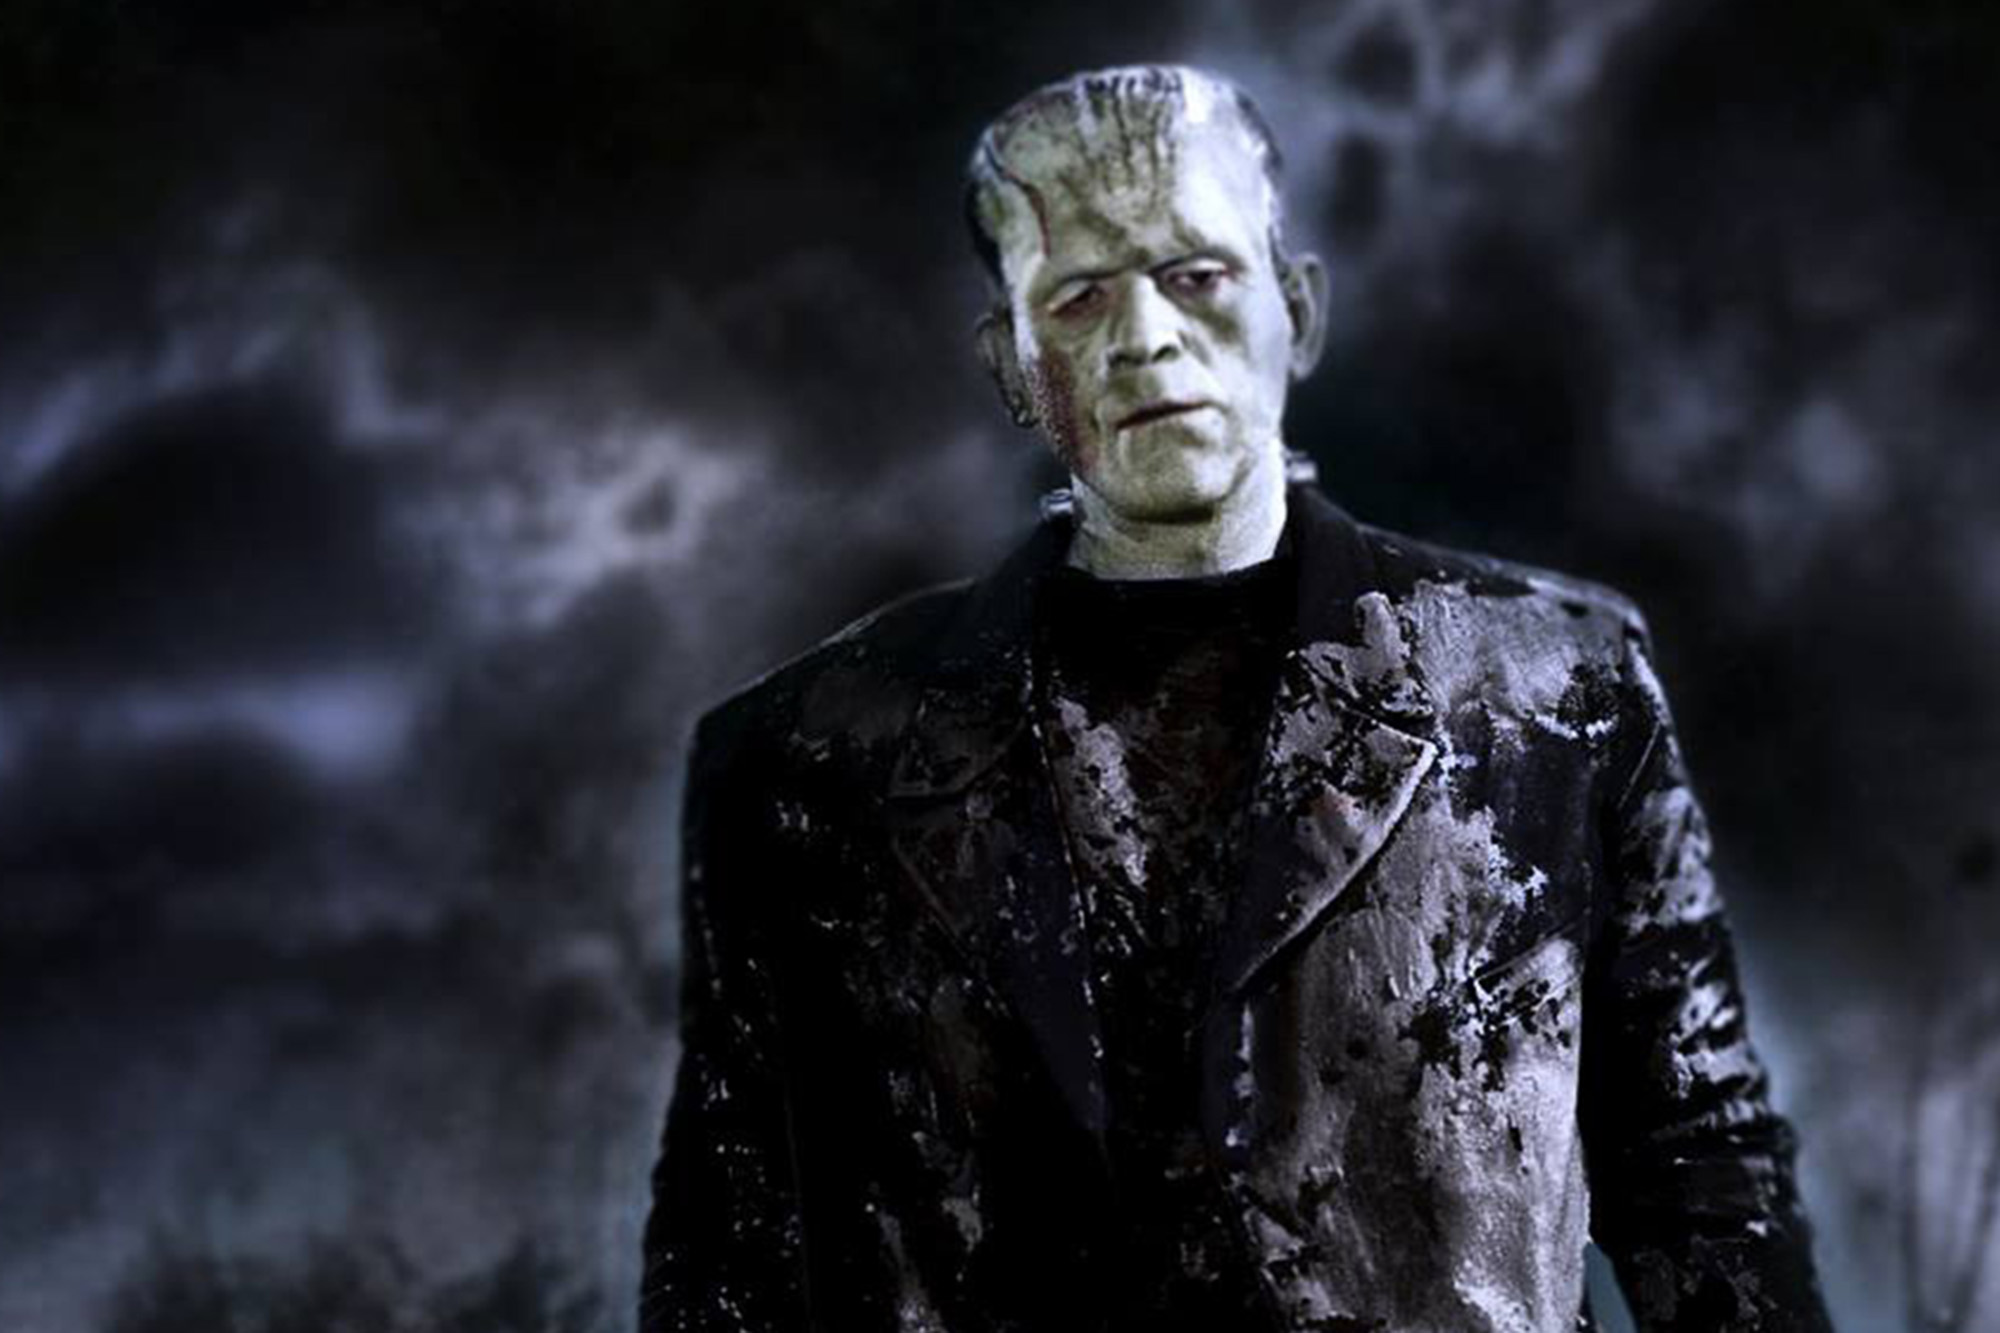 This is the real science that 'inspired' the gruesome story of Frankenstein's monster